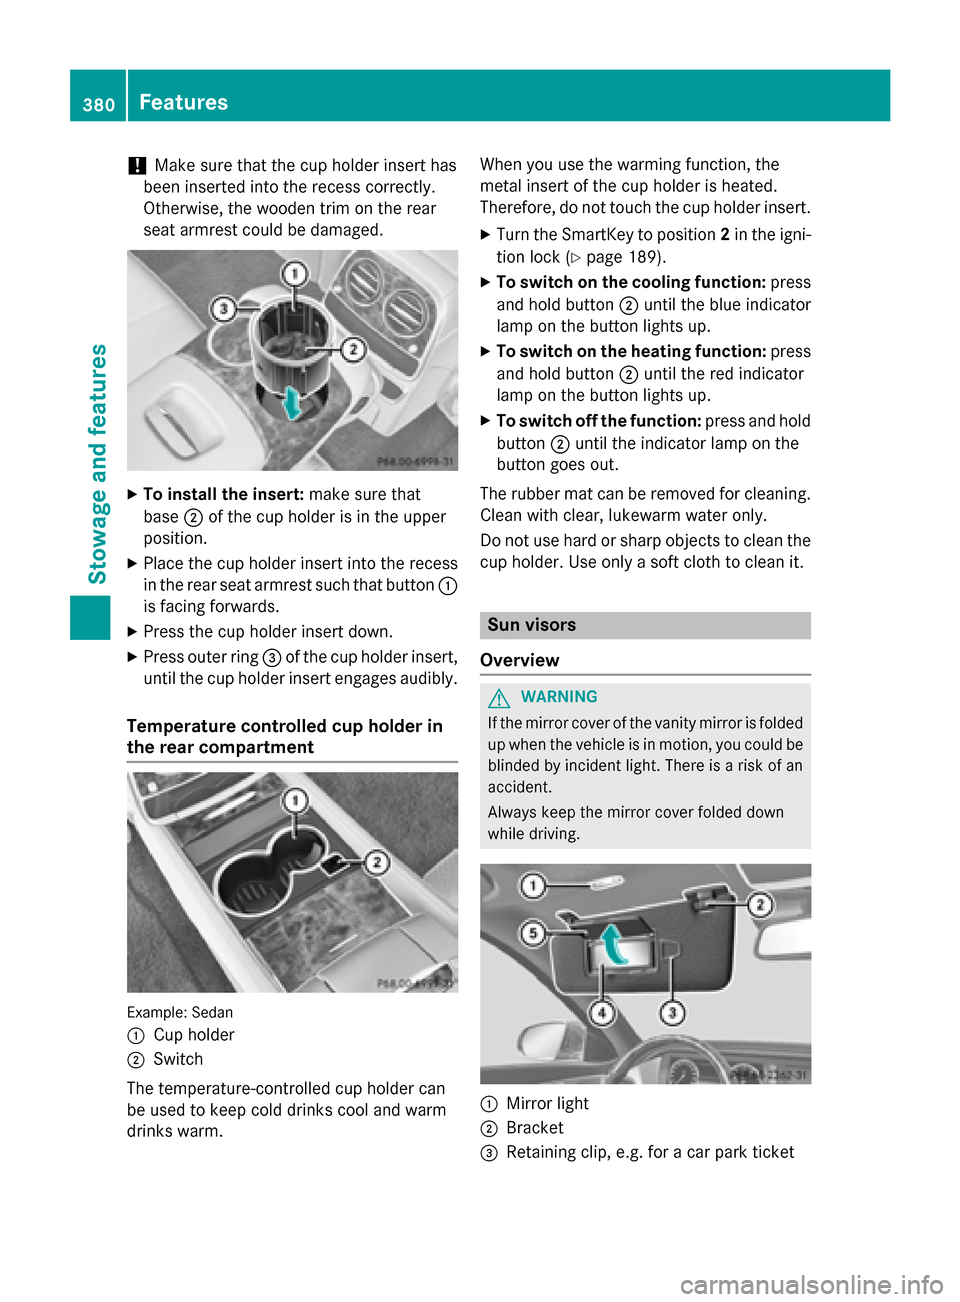 MERCEDES-BENZ S-Class 2015 W222 Owners Manual !
Make sure that the cup holder insert has
been inserted into the recess correctly.
Otherwise, the wooden trim on the rear
seat armrest could be damaged. X
To install the insert: make sure that
base ;